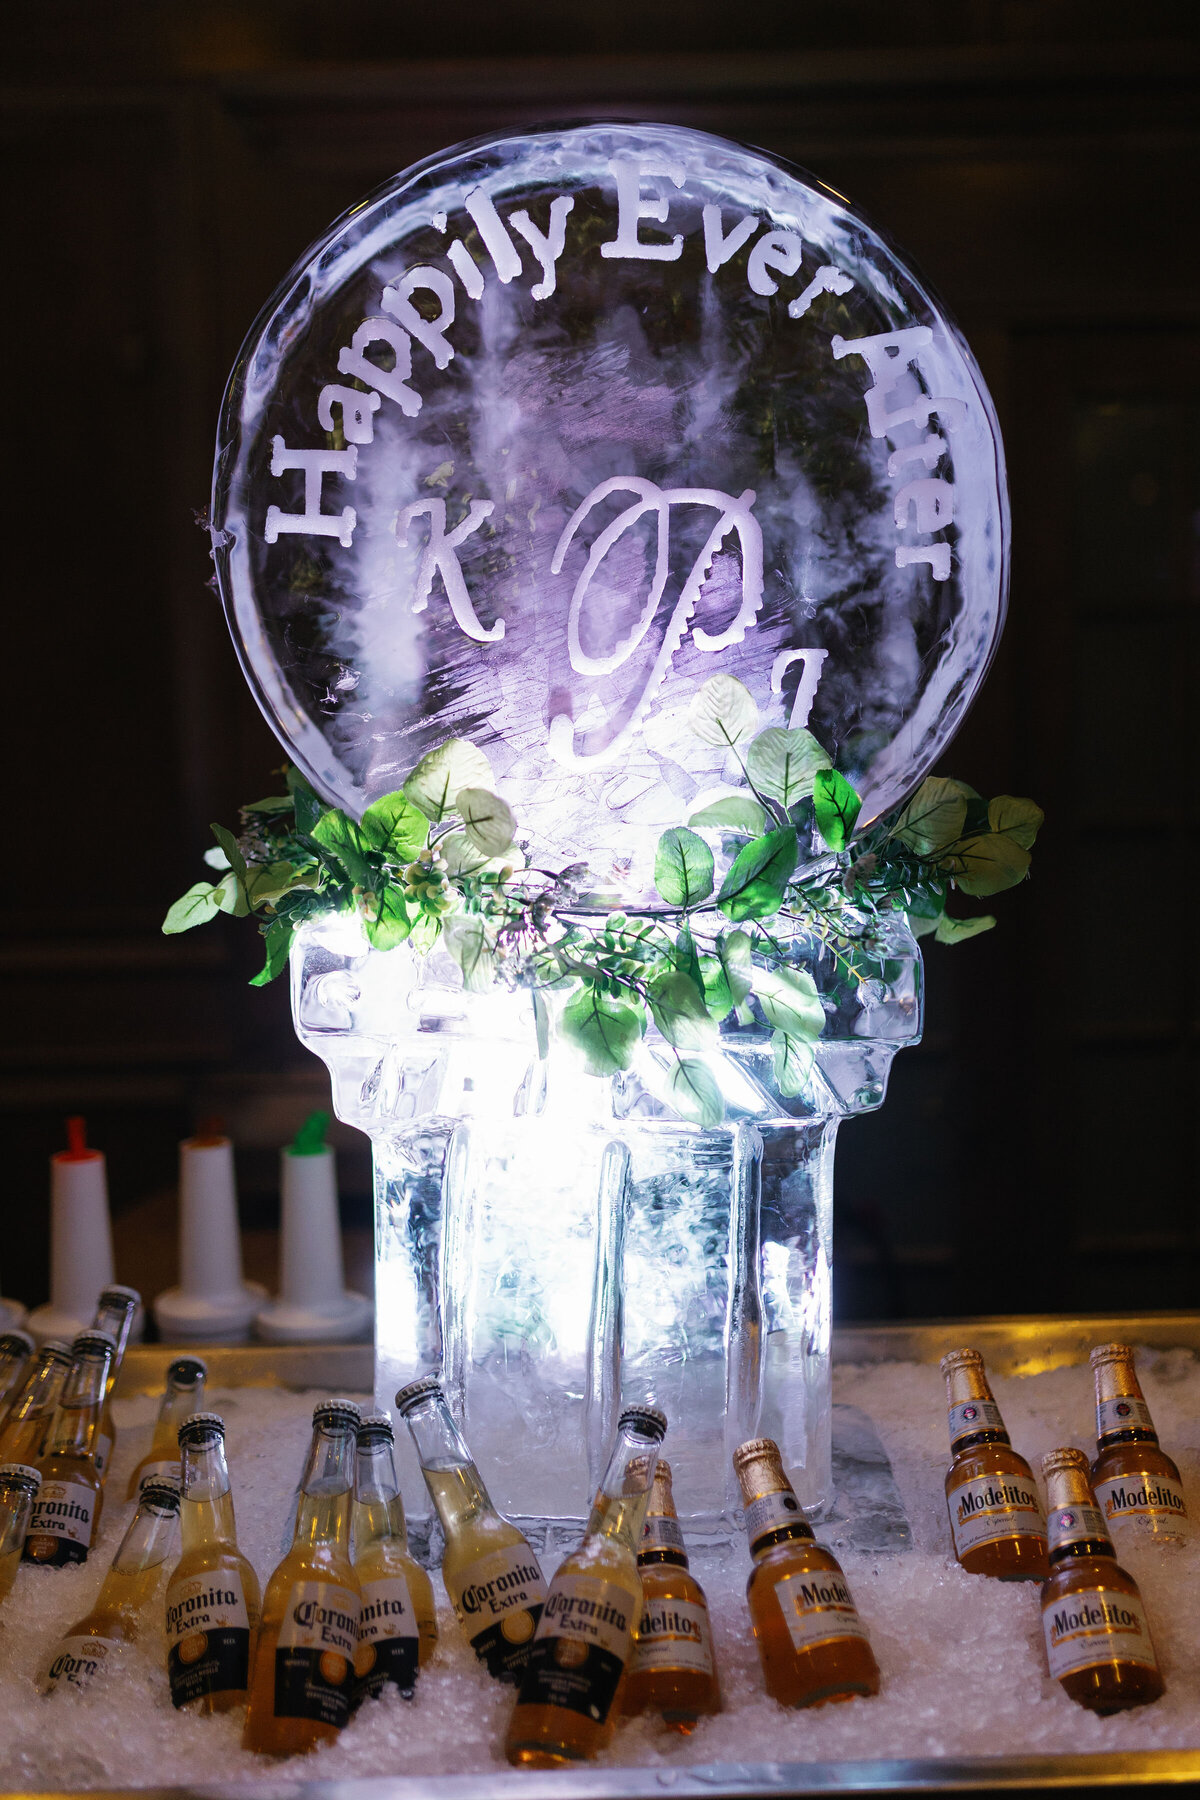 custom-ice-bar-wedding-decor-details-happily-ever-after-ice-bar-enza-events